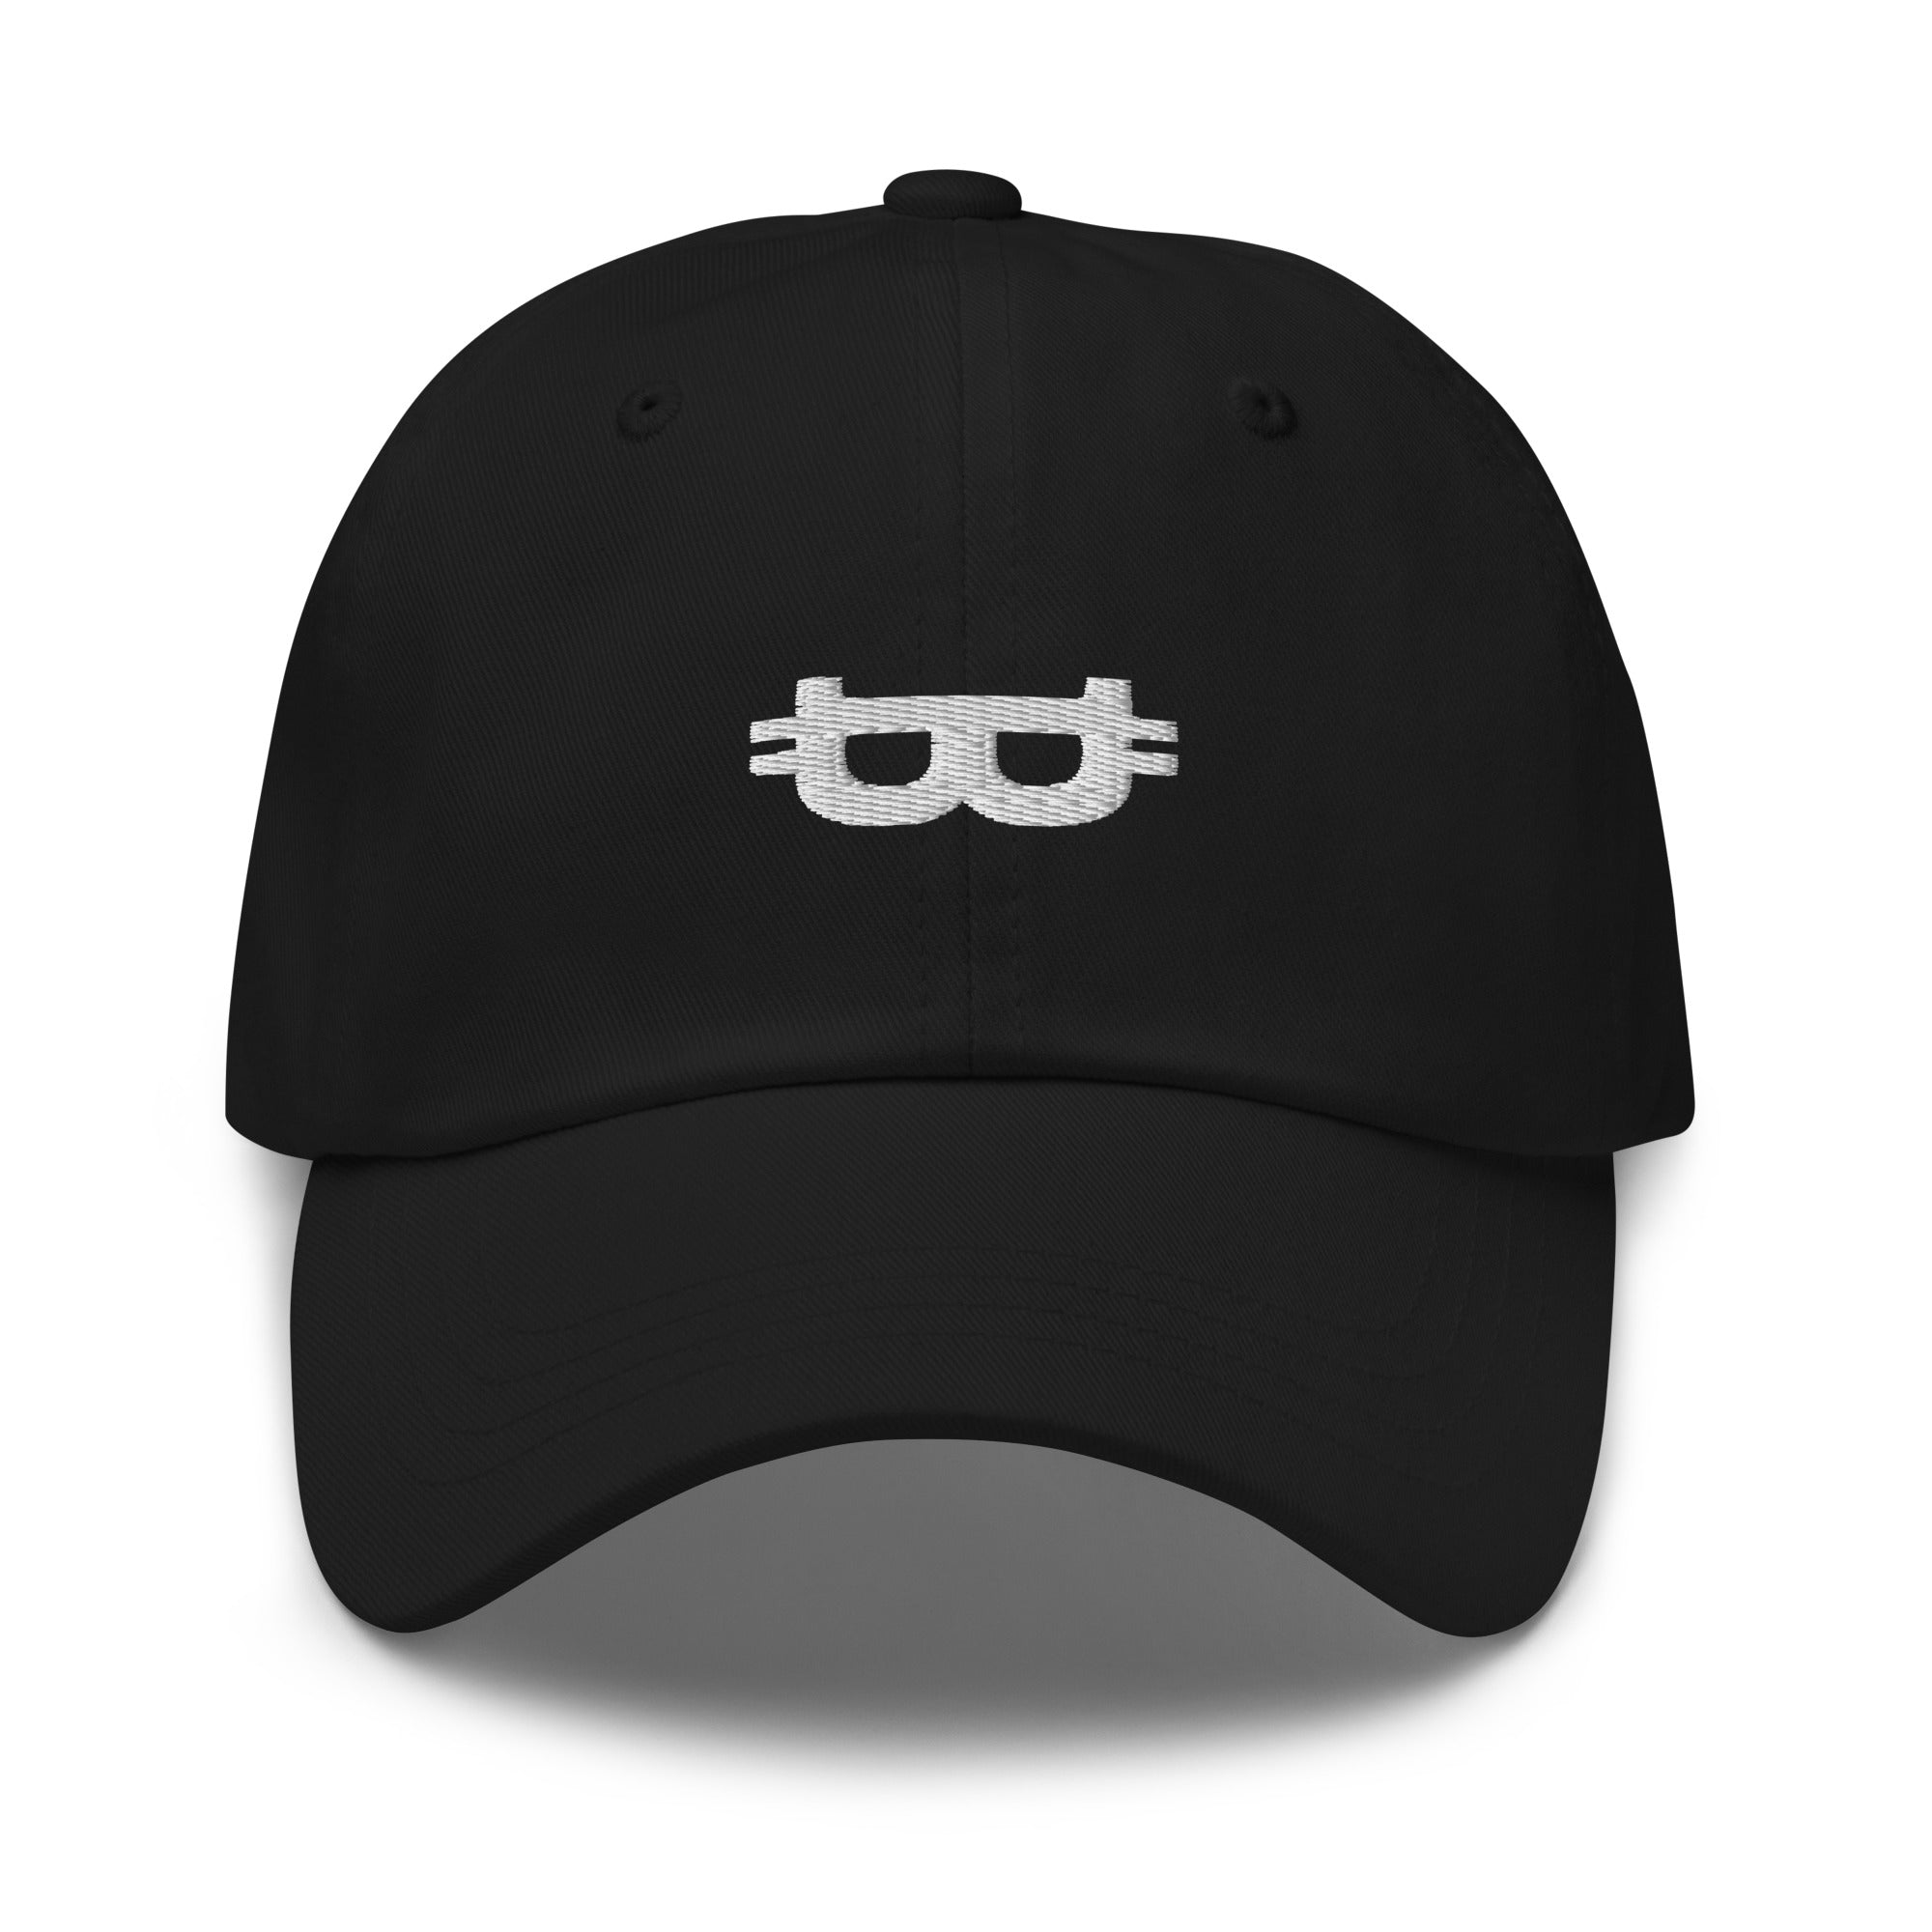 Bitcoin Hat - The Satoshi Mask Hat features an embroidered logo on the front of a black cap. Front view.